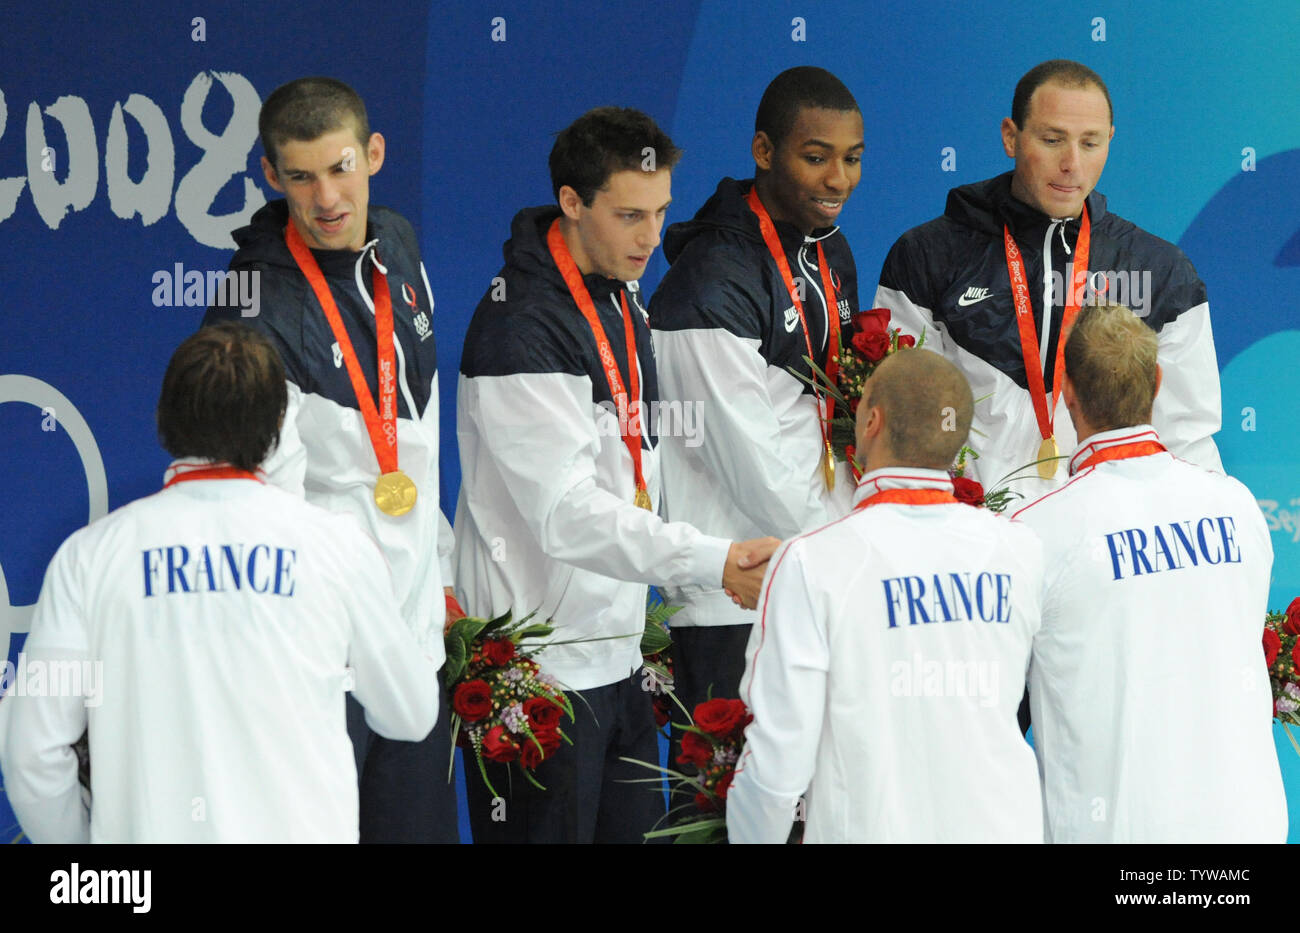 The French 4x100M Relay team congratulates the USA's gold medal team of (L-R) Michael Phelps, Garrett Weber-Gale, Cullen Jones and Jason Lezak during the awards ceremony at the National Aquatics Center at the Summer Olympics in Beijing on August 11, 2008.  The United States team won the gold in a World Record time of 3:08.24, nipping the French team by 0.07 second.    (UPI Photo/Pat Benic) Stock Photo